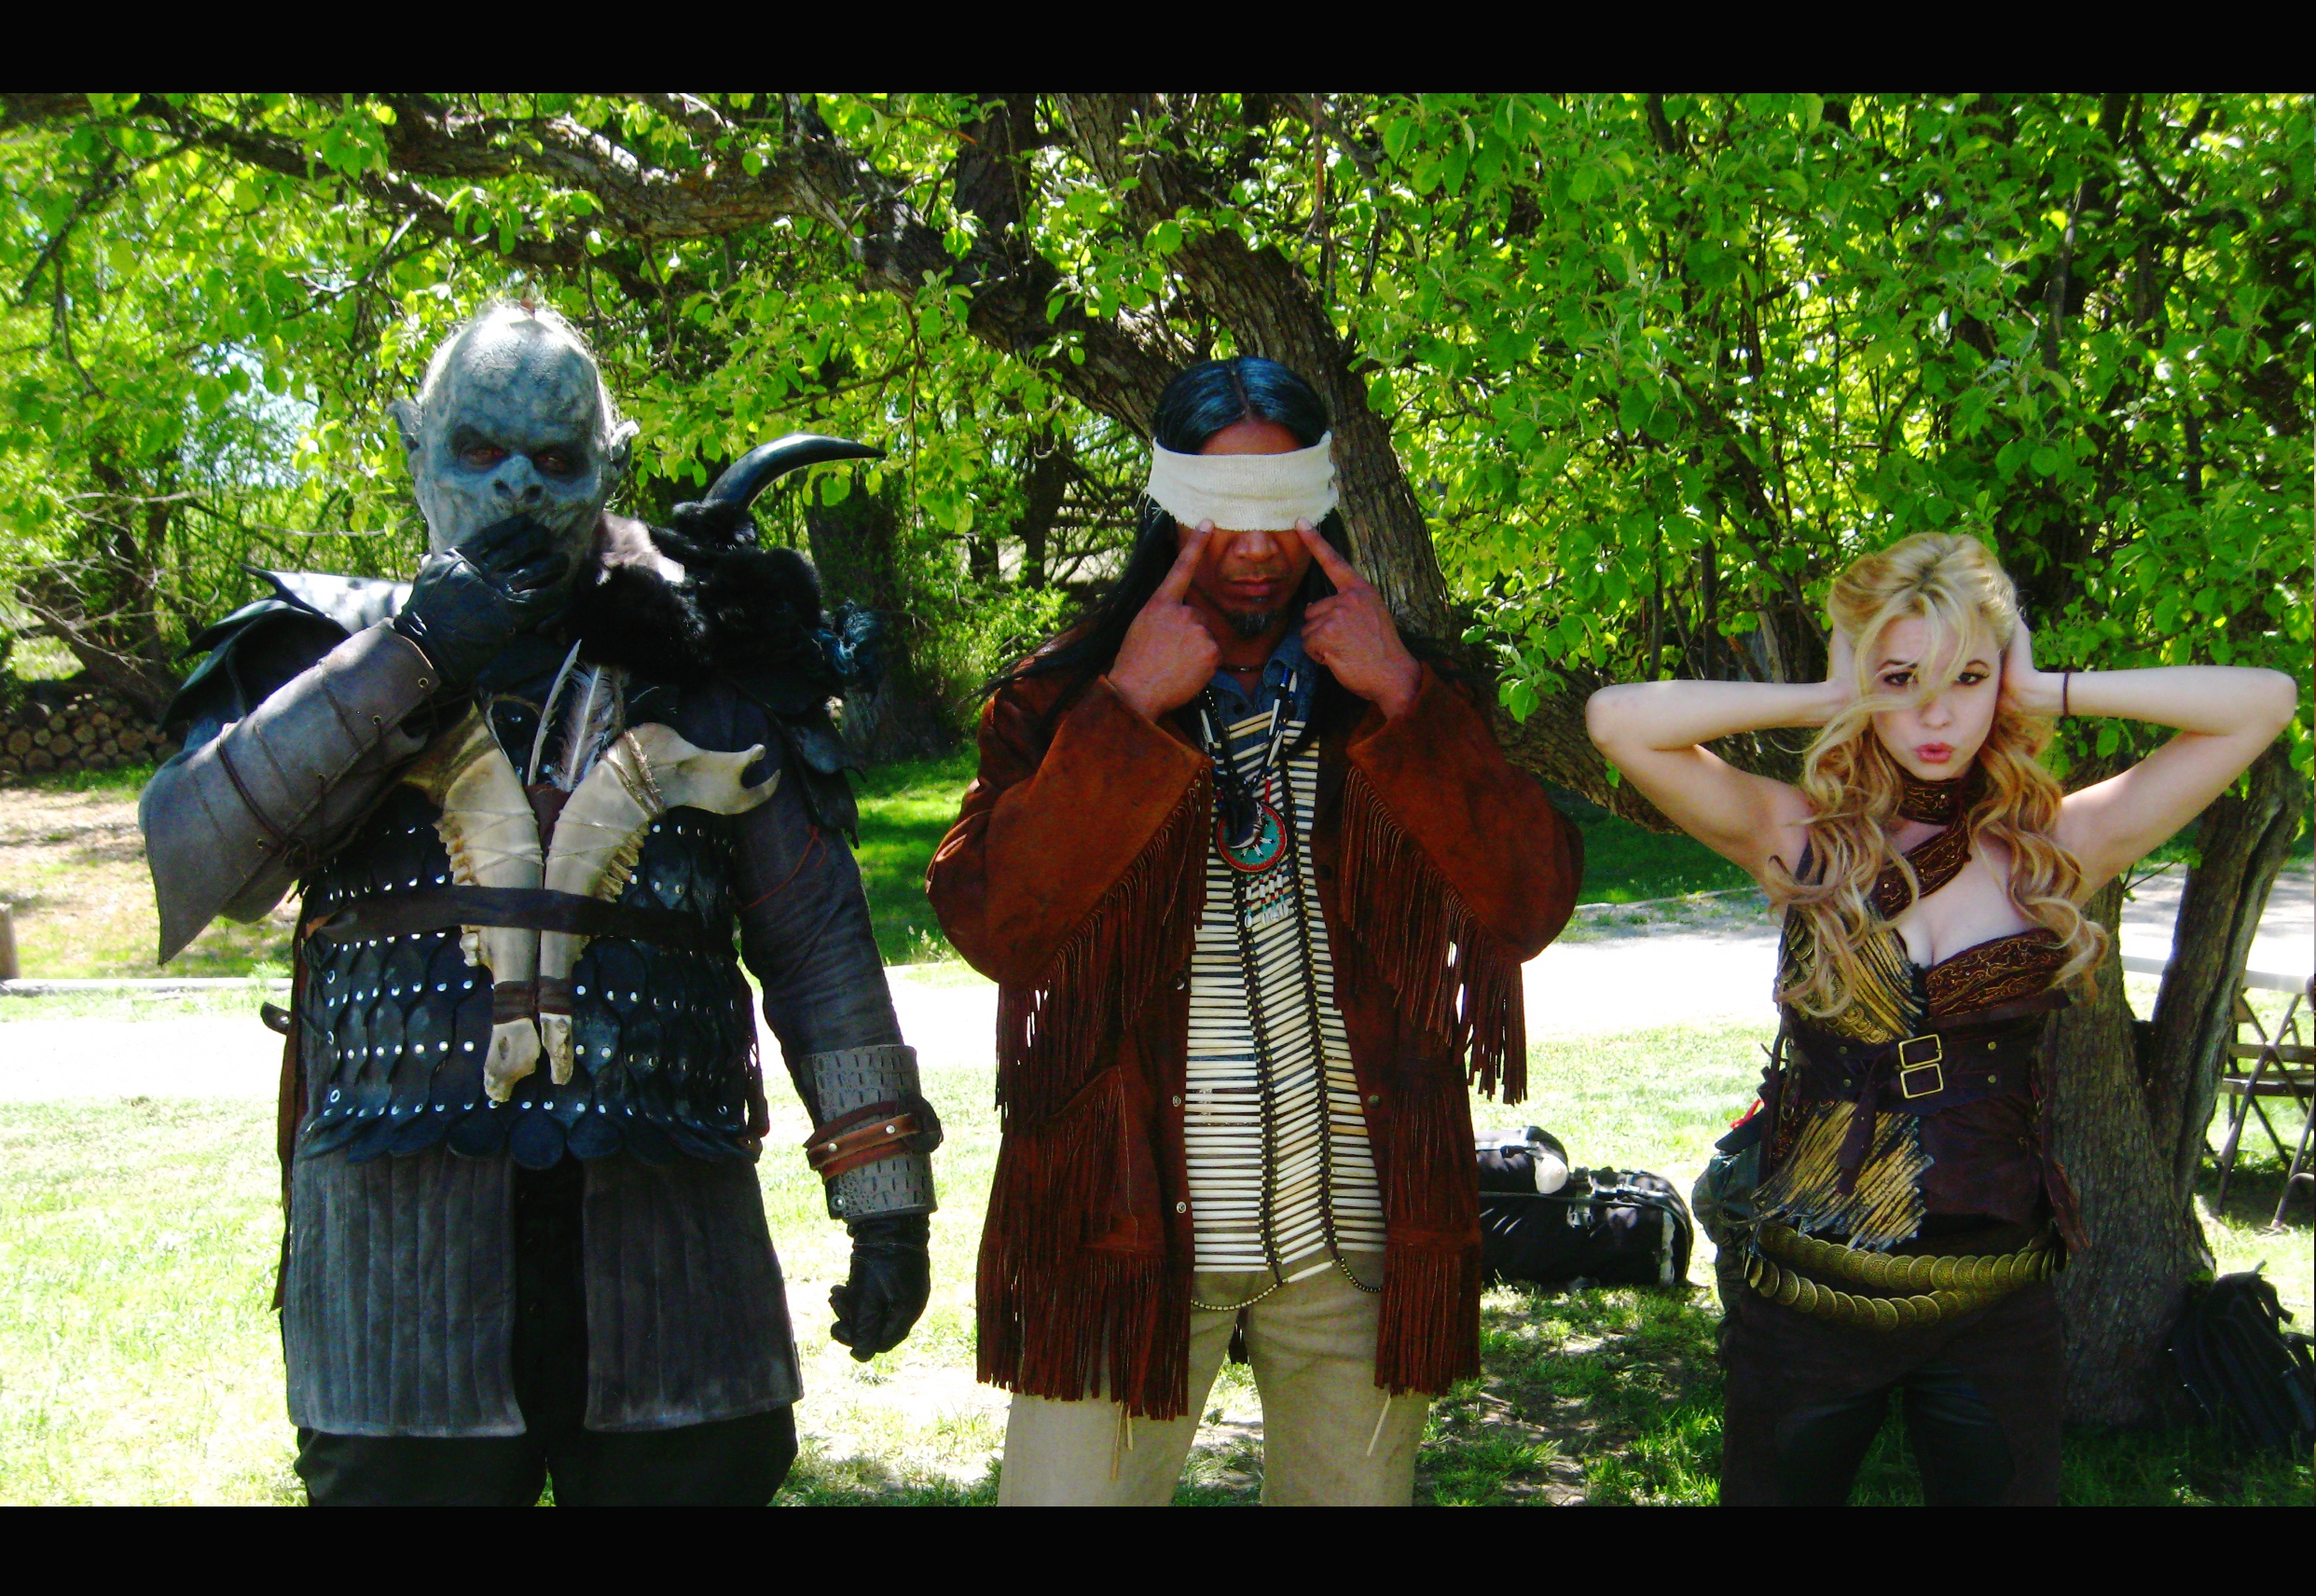 On-the-Set: Having serious fun with actors Adam Johnson (L), and Masiela Lusha (R) on the set of ORC WARS.